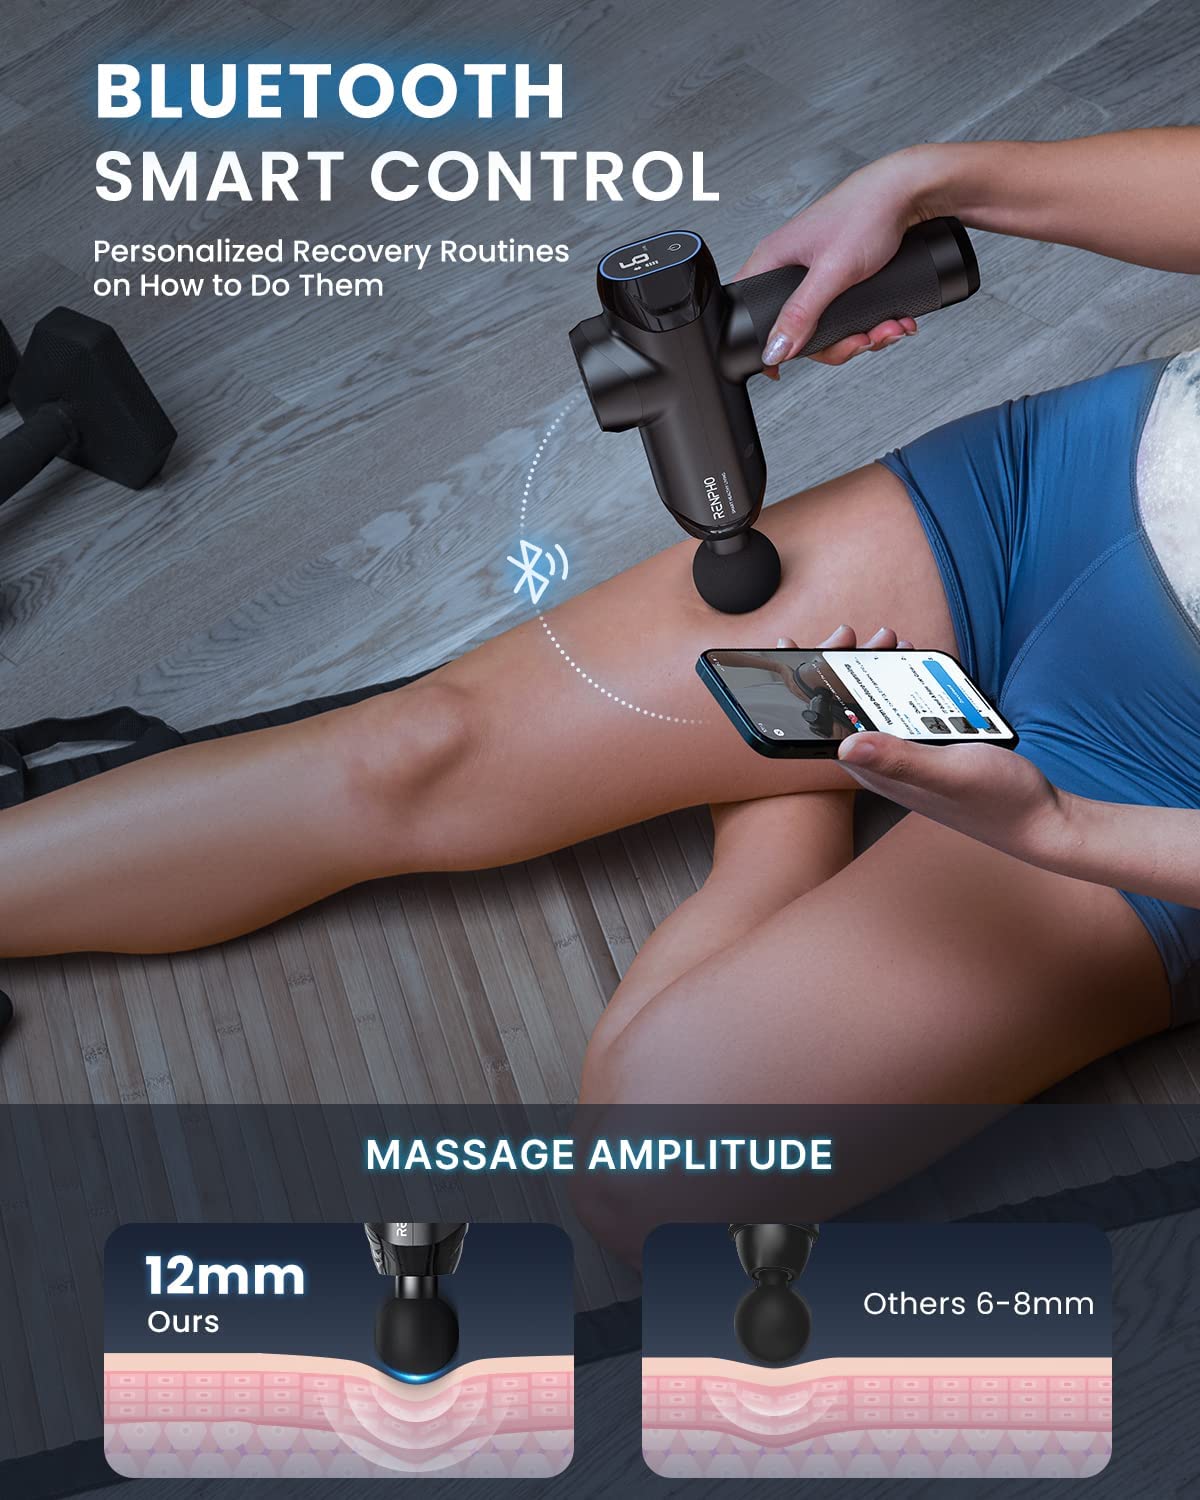 An advertisement highlighting a person using a Renpho EU Power Massage Gun on their leg. The image includes a smartphone displaying the device's app. Text emphasizes the product's 12mm massage amplitude compared to others.